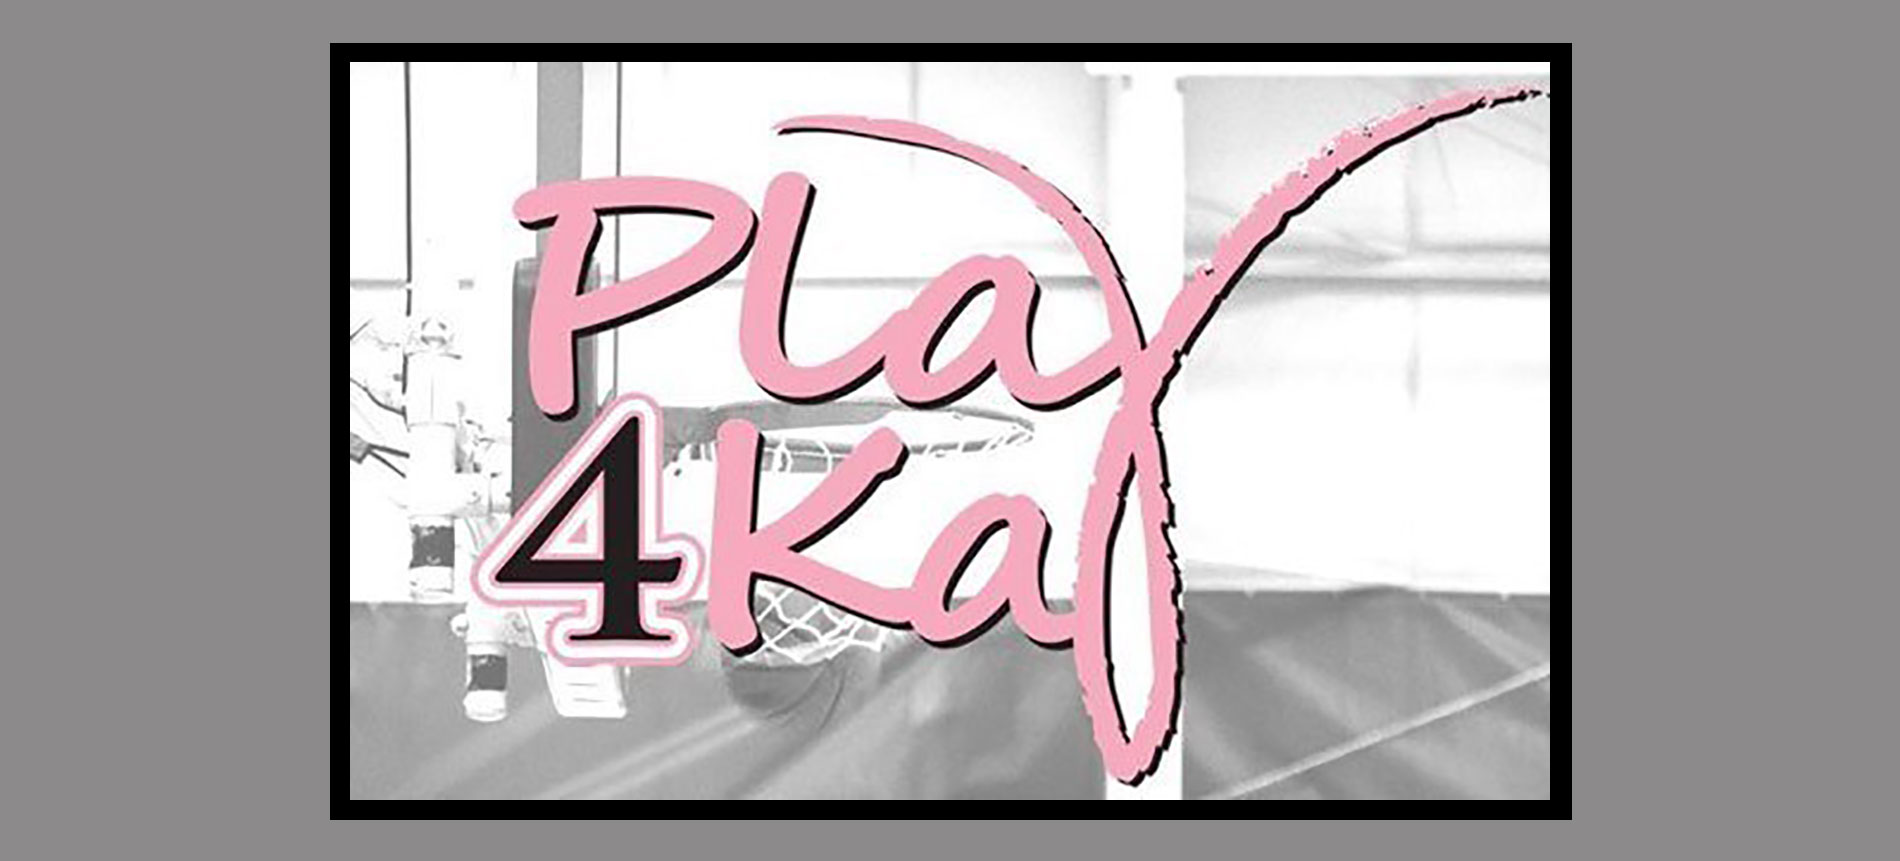 Anderson University Named NCAA Division II National Winner for 2019 Play4Kay Initiative